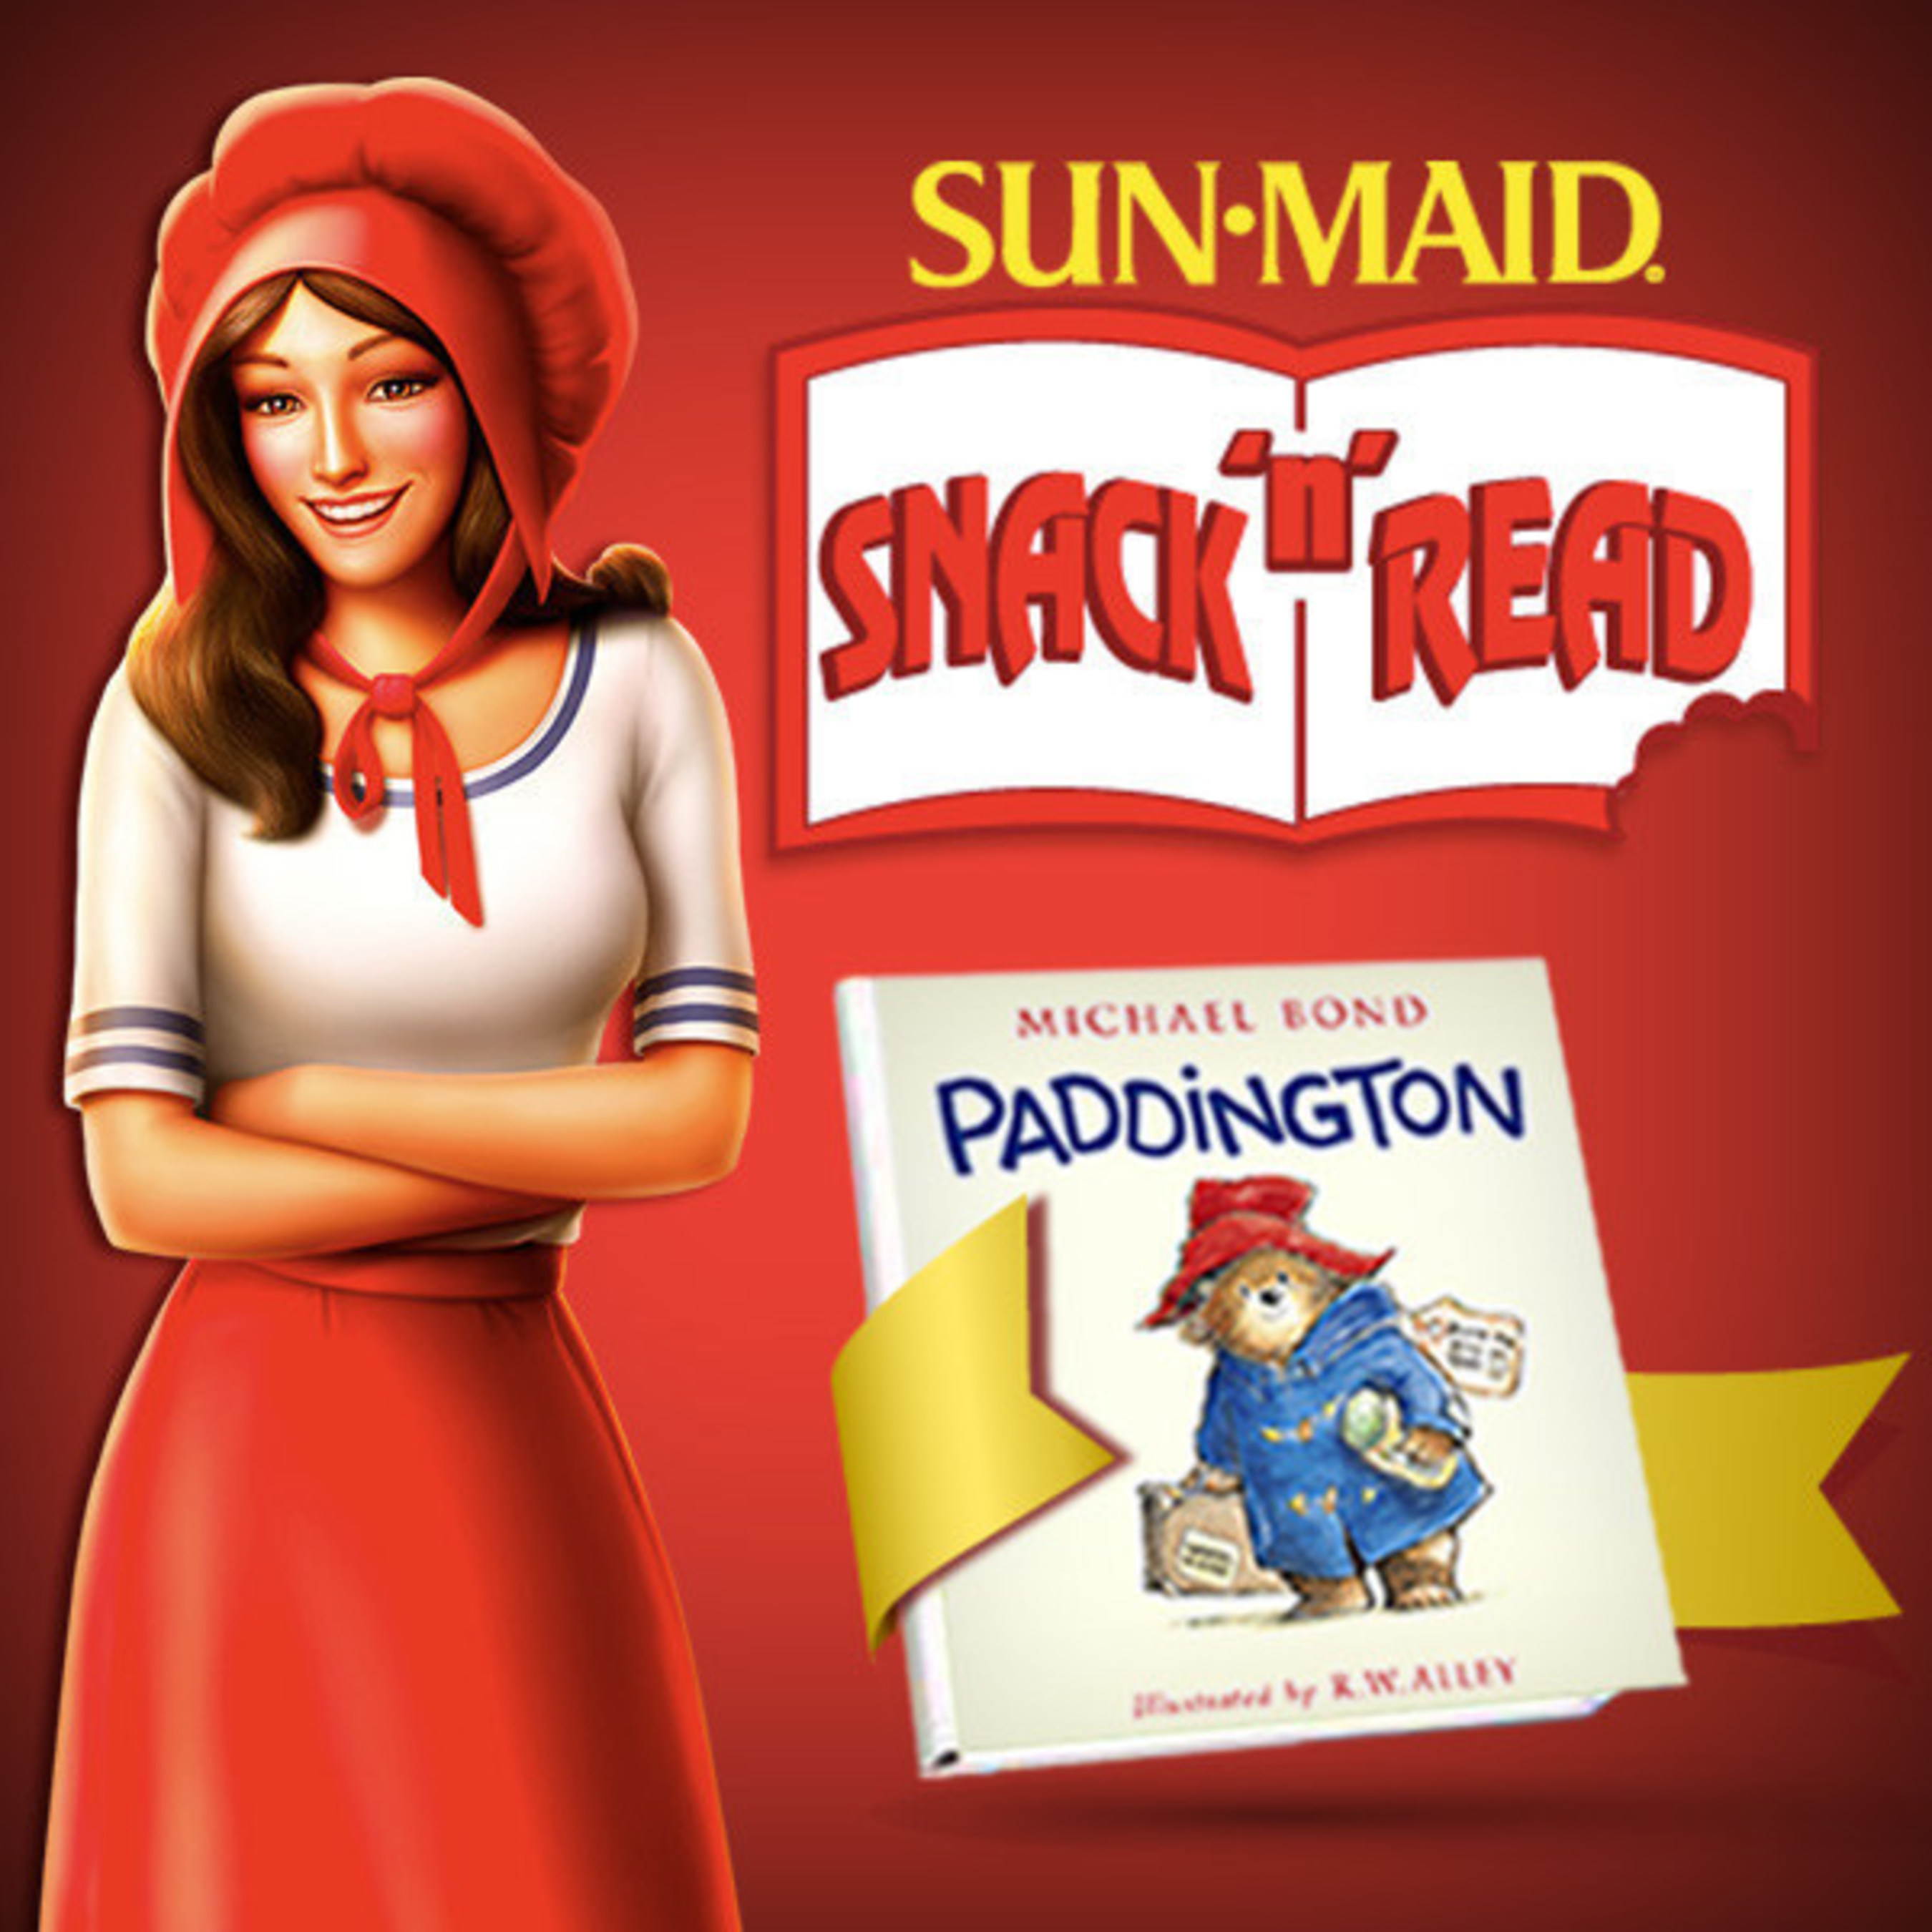 "Paddington" is the final of three free books offered in Sun-Maid's Snack 'n' Read series in partnership with HarperCollins Publishers. People can enter to win every day. 200 winners are randomly chosen daily and 10 winners will receive a sweepstakes prize package of HarperCollins Story Time Library sets. Details at www.sunmaidoffer.com